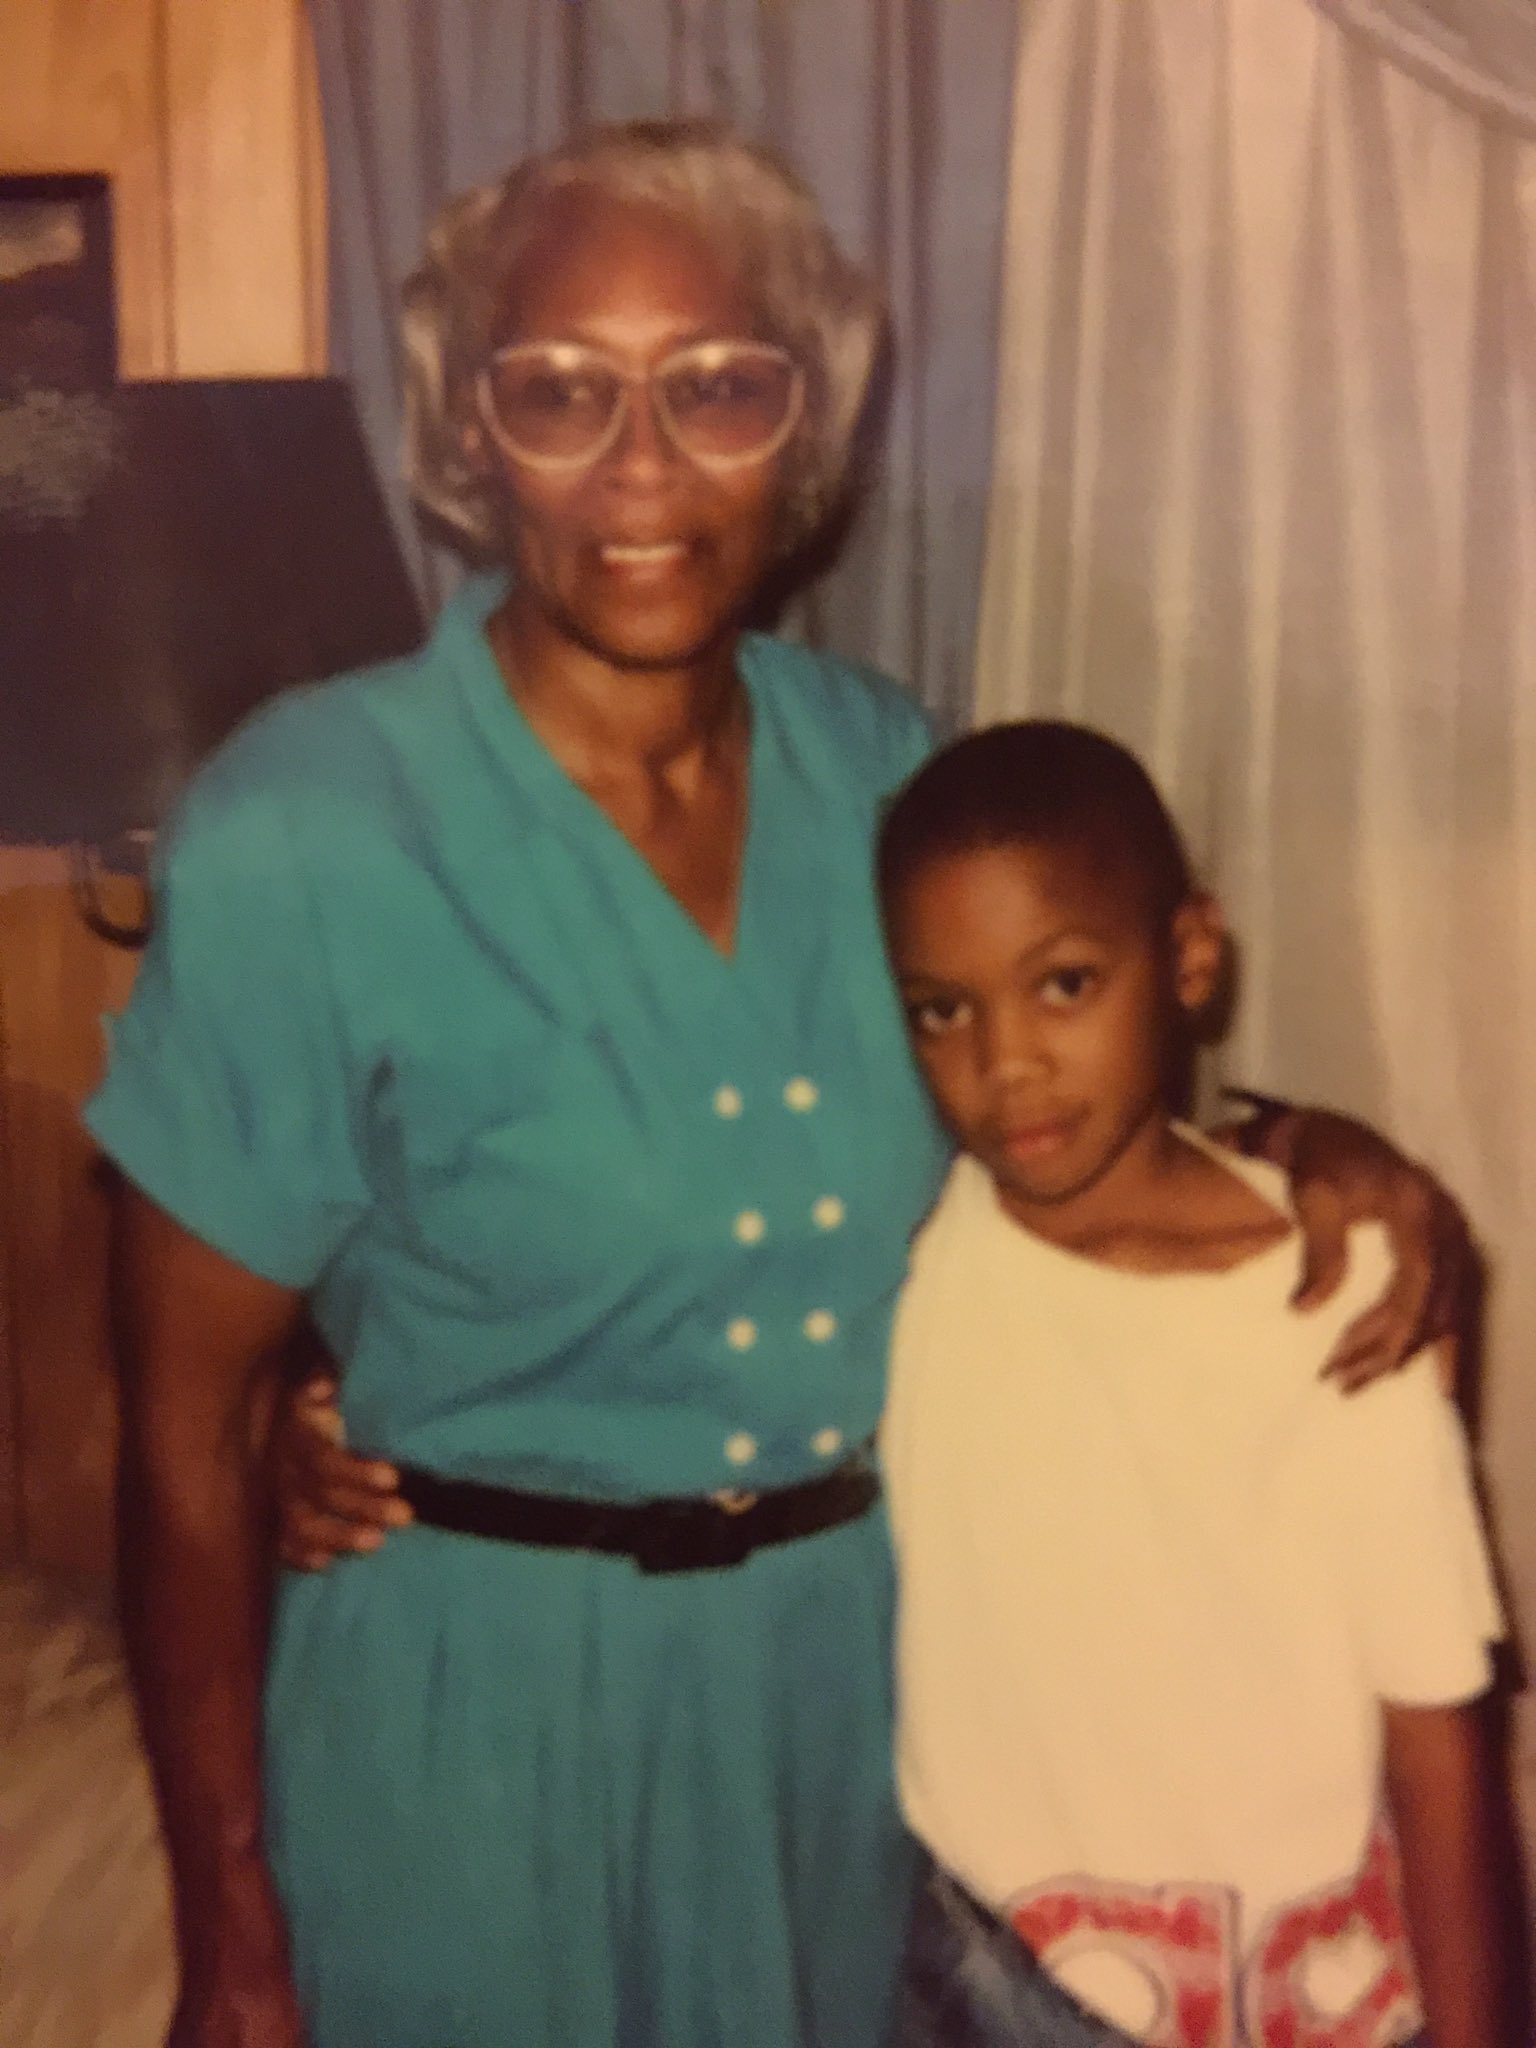 Little Tim with his grandmother